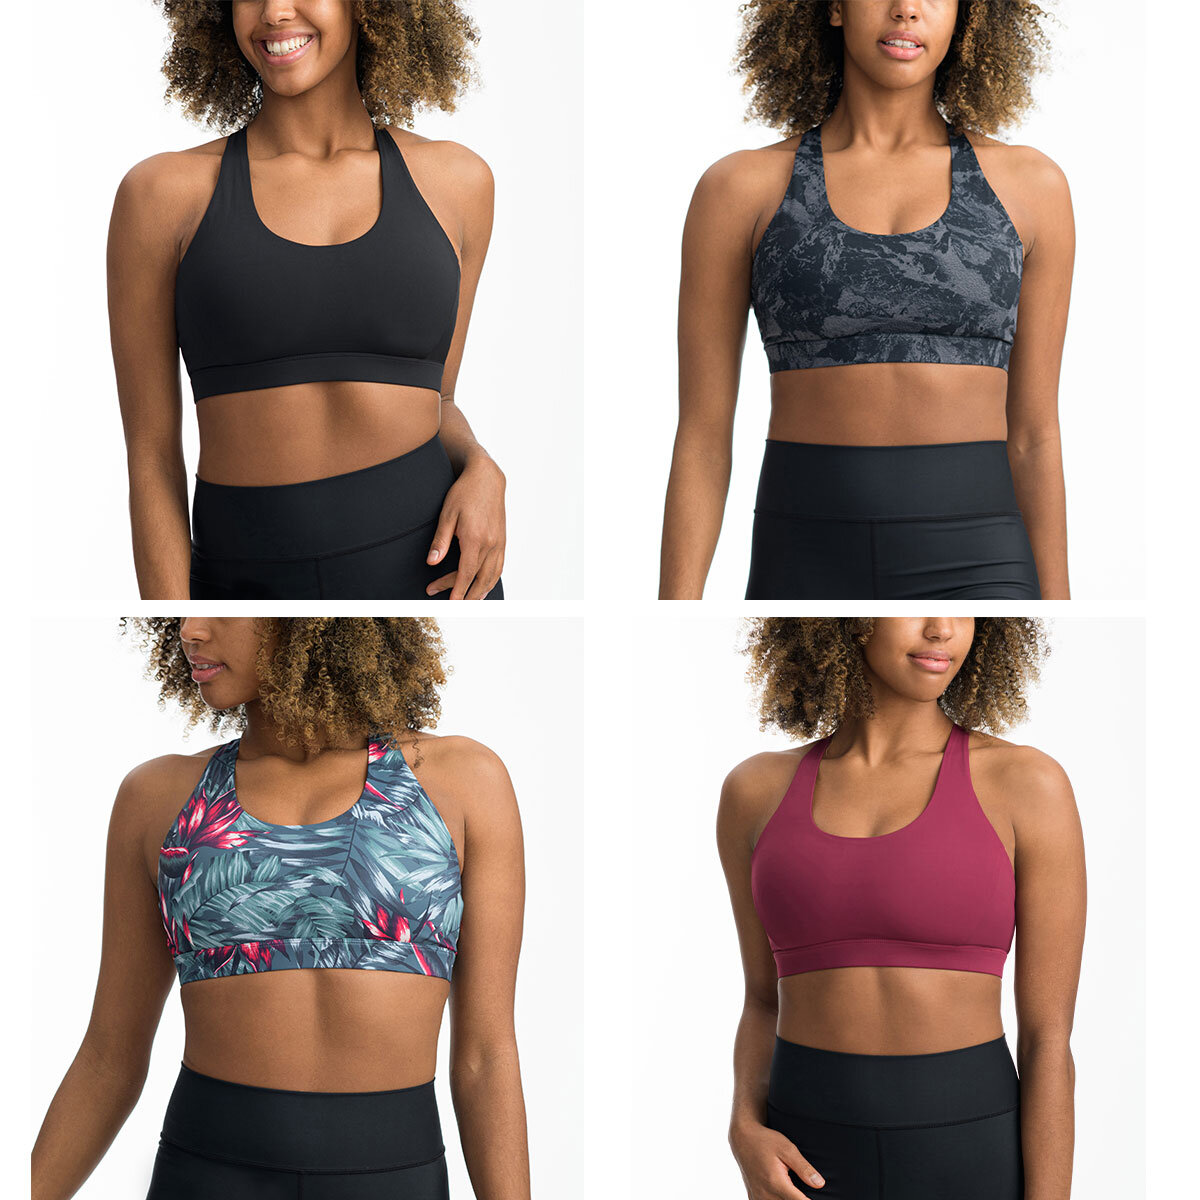 Lolë sports bra, 2-pack offer at Costco